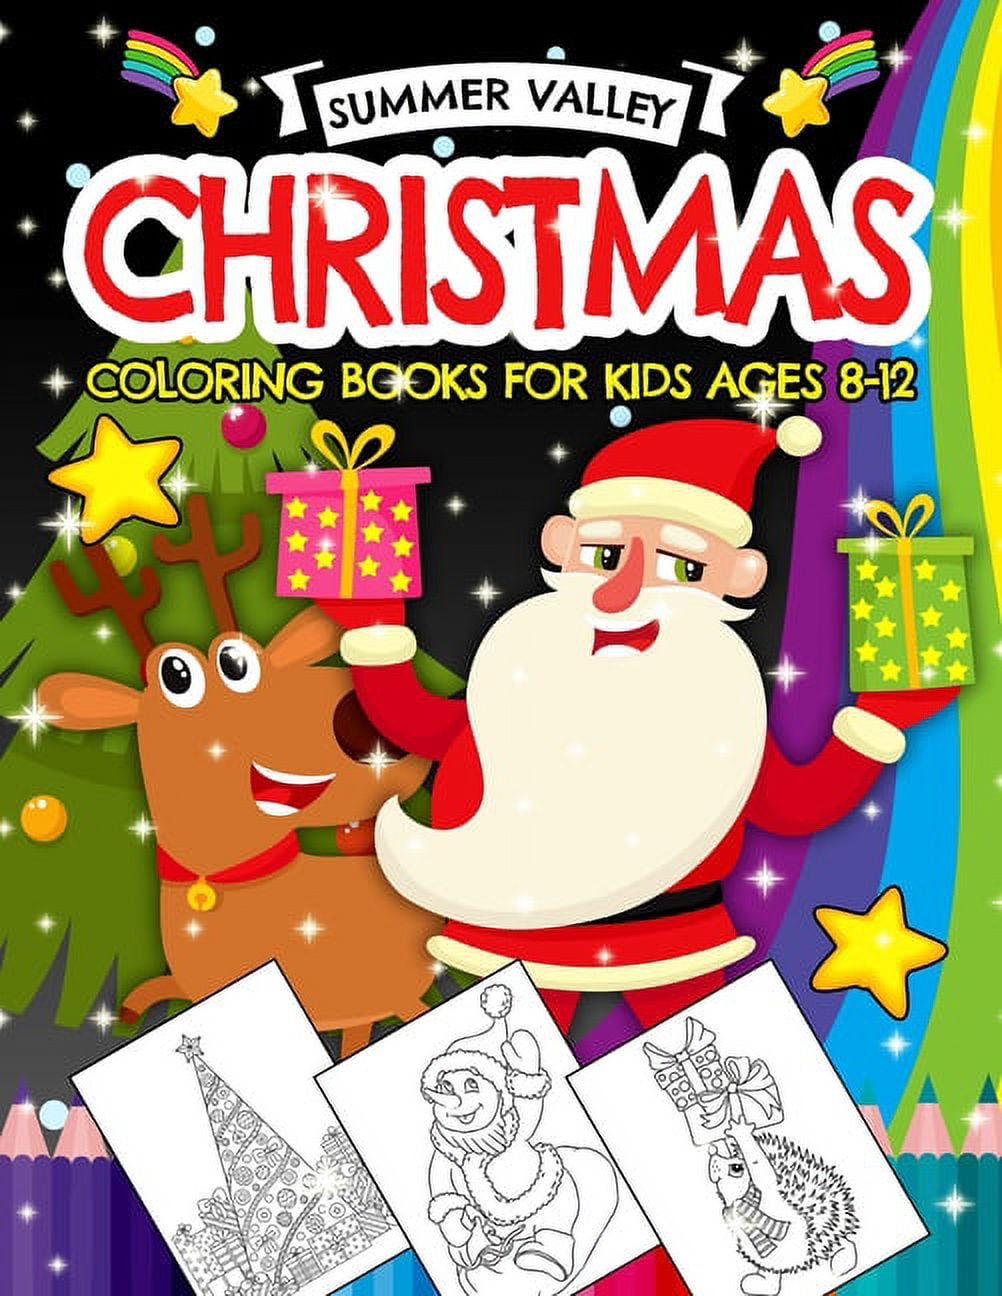 Christmas Coloring Books for Kids Ages 8-12: Easy Xmas Colouring Pages Gift  for Boys and Girls. Beautiful Illustrations to Color With Santa Claus,  Snowmen, Reindeer & More! (Volume 1) (Paperback) 